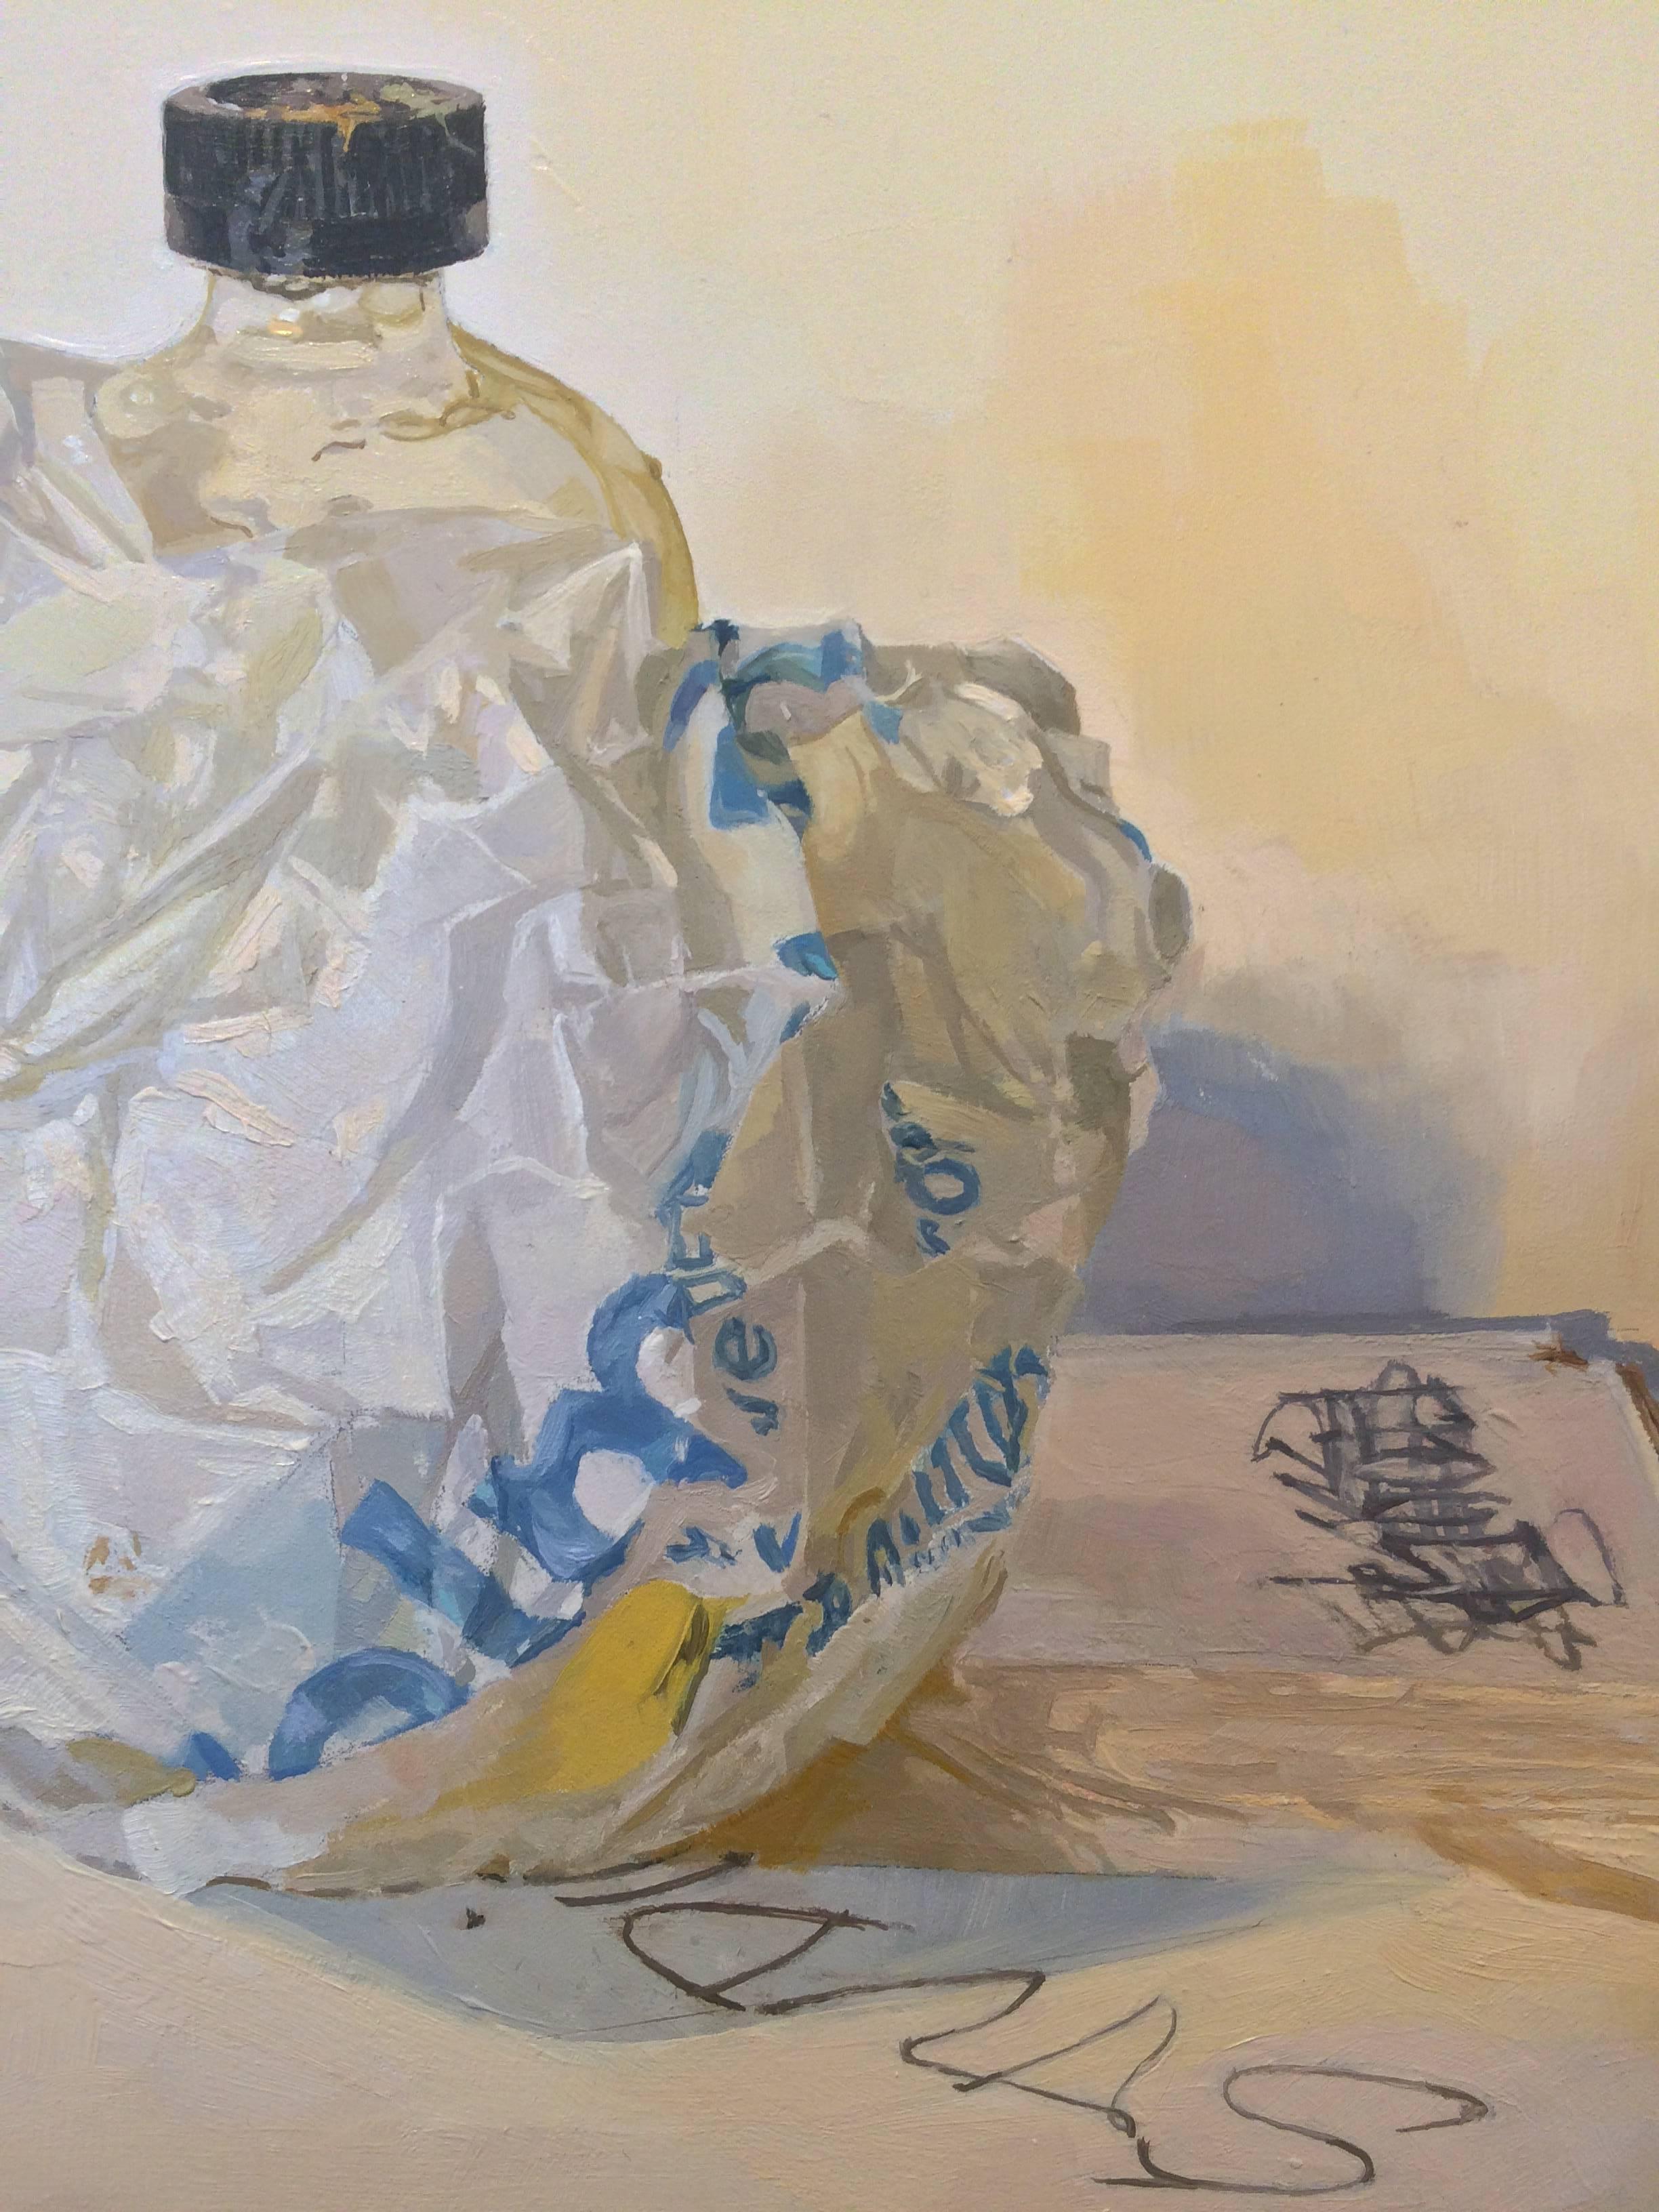 In this quiet still life painting, a single bottle of linseed oil in a crumbled white bag with light blue letters on the side stands atop a nondescript white cardboard box that reads 